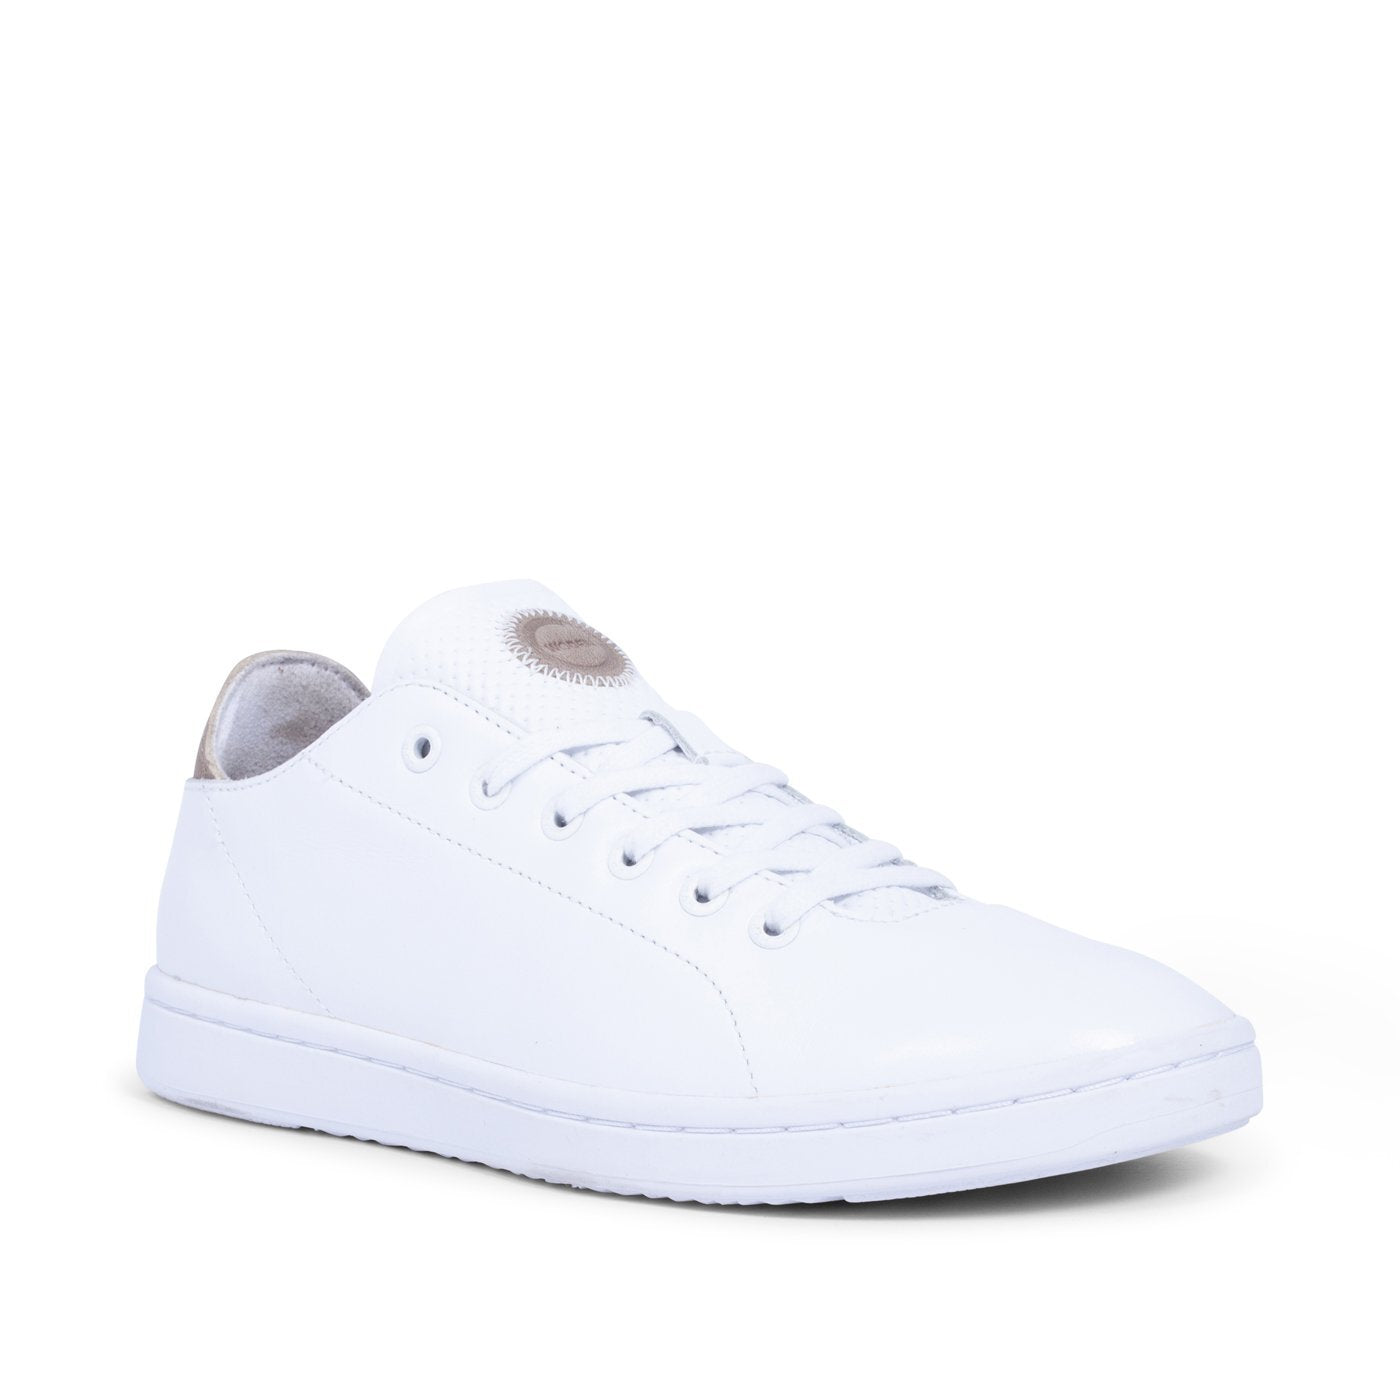 Leather trainer | Woden